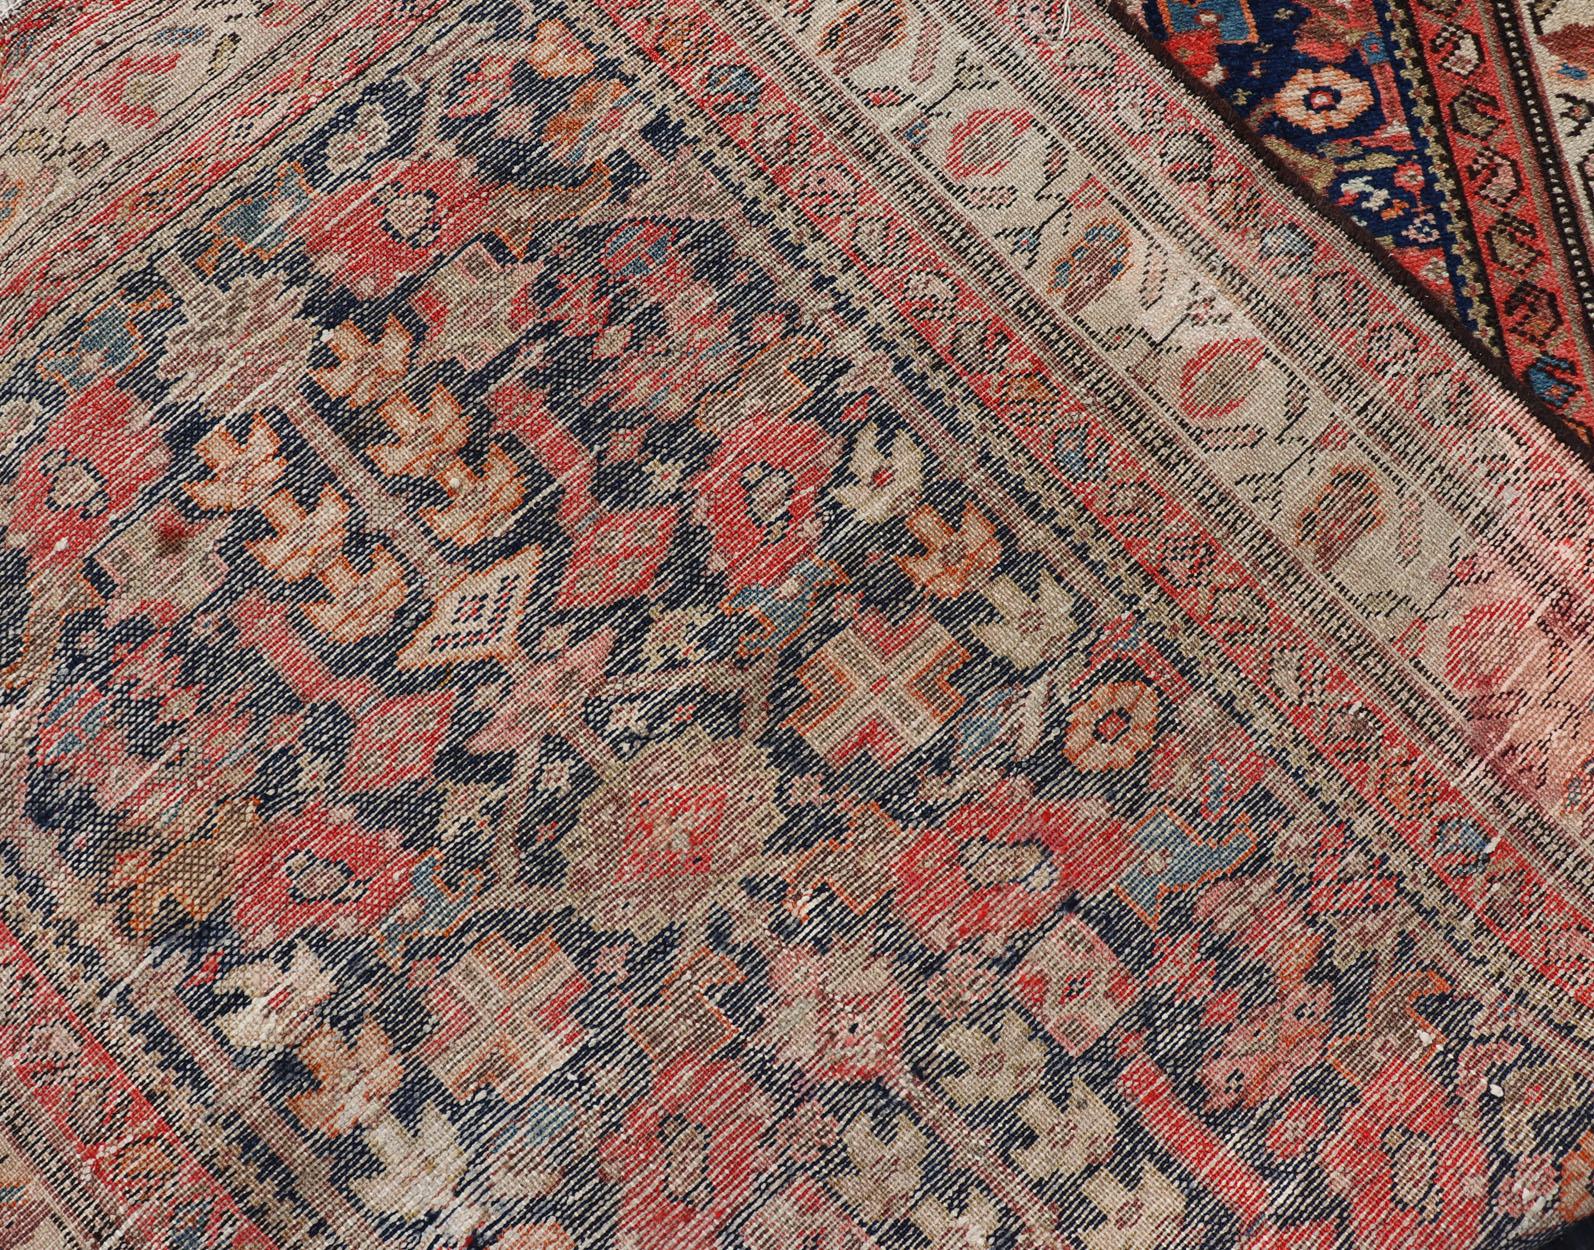 Early 20th century antique Malayer long Runner rug in blue, orange and brown 

Measures: 3'4 x 16'10 

Antique Malayer runner, Keivan Woven Arts- Rug/H-510-01, antique Malayer, antique Malayer runner. This magnificent antique Malayer runner